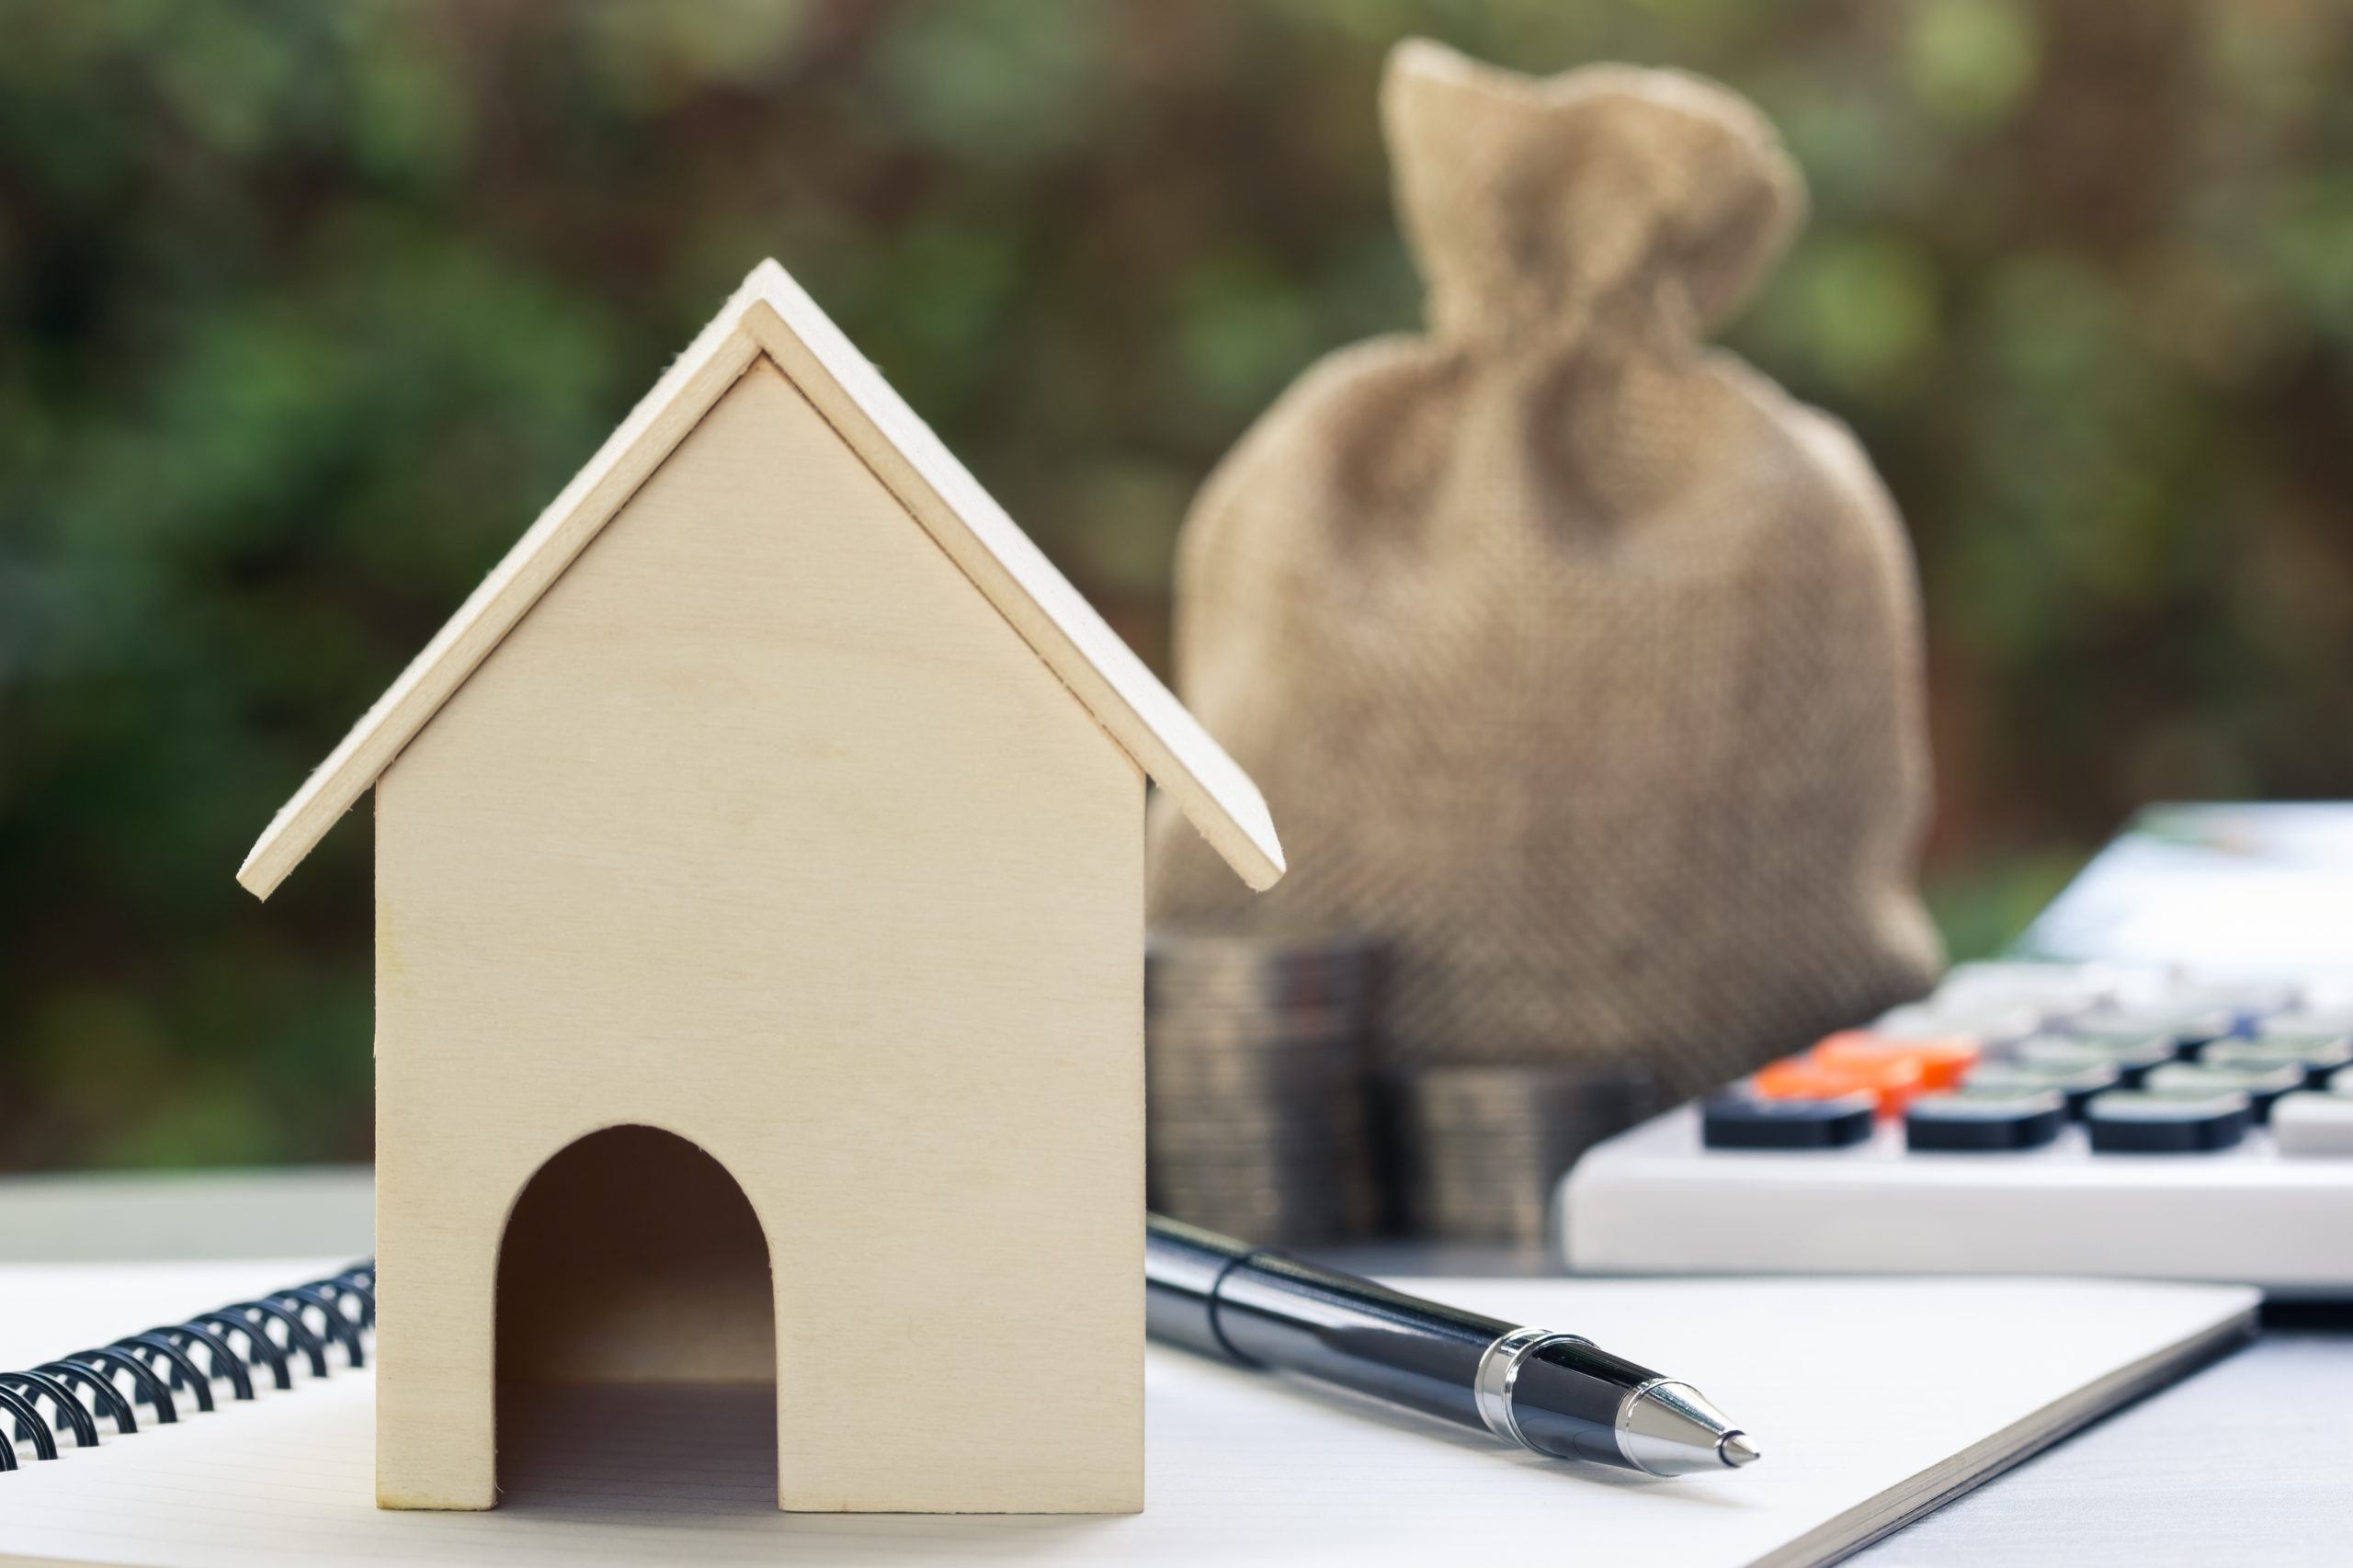 Home loans, cheap home projects, first homes to start a family concept. A small house model on notebook and pen with blurred money bag, stacked coins and calculator as background. Loan, mortgage.